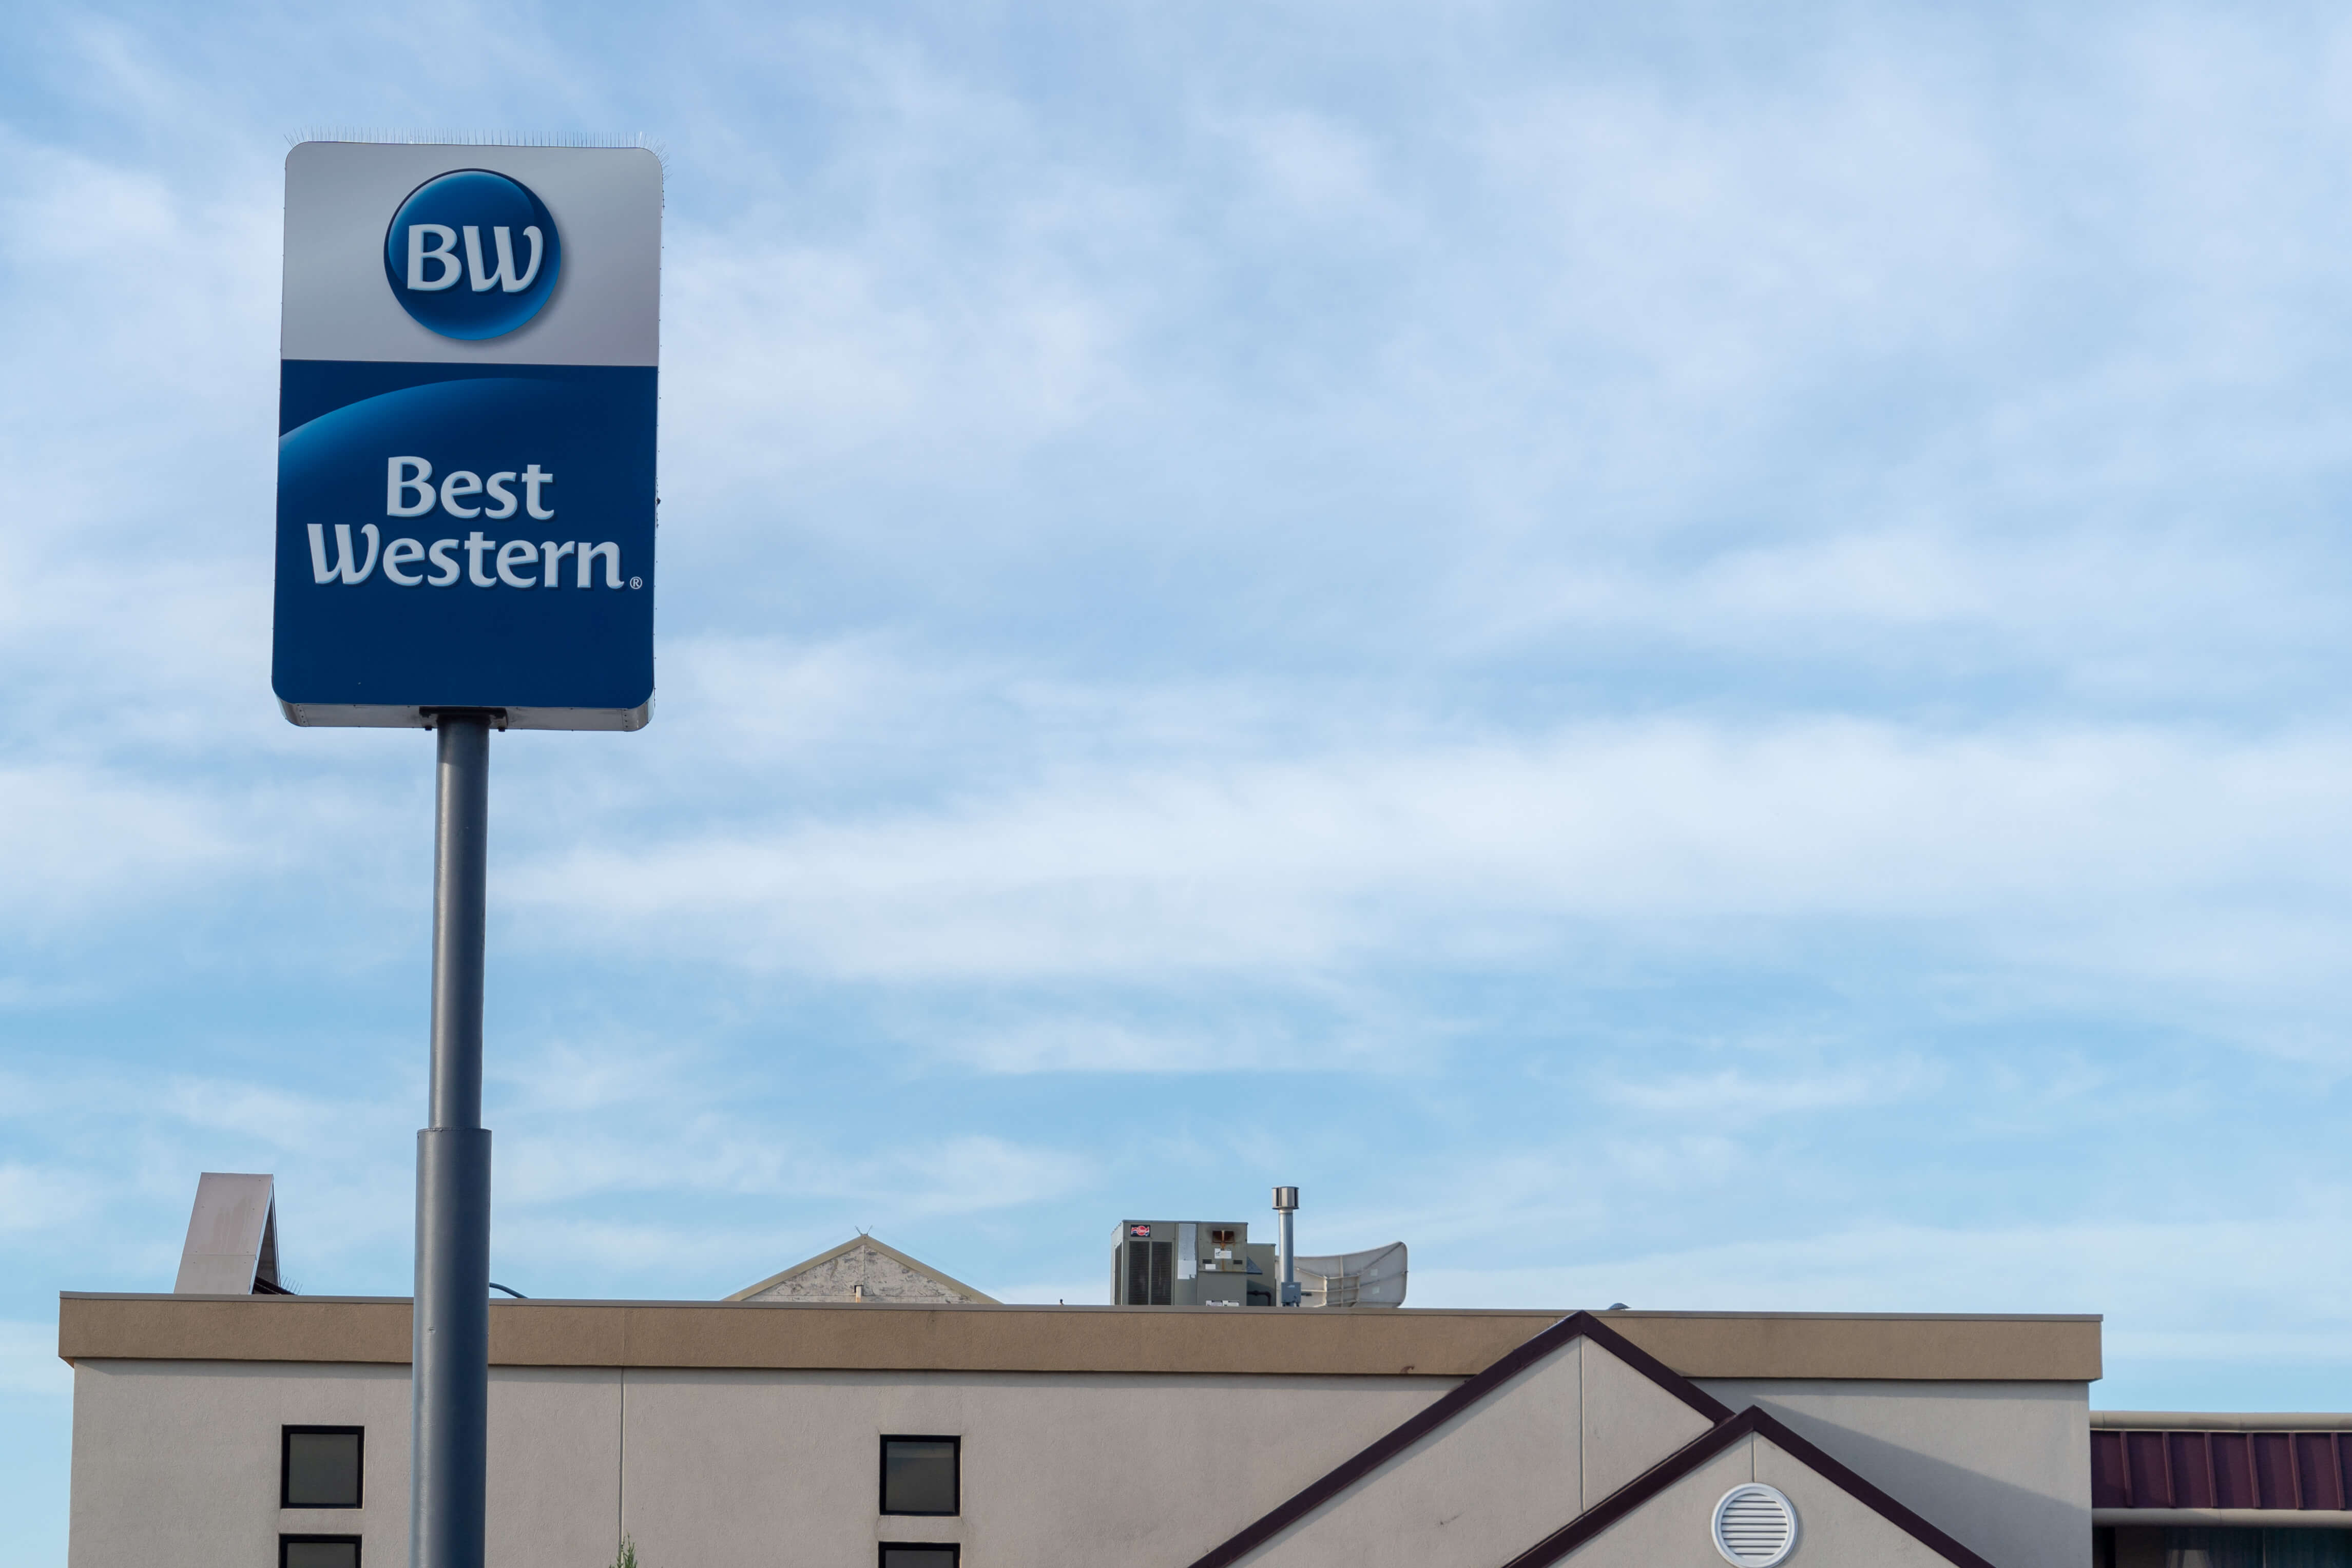 The Best Western Hotel chain.